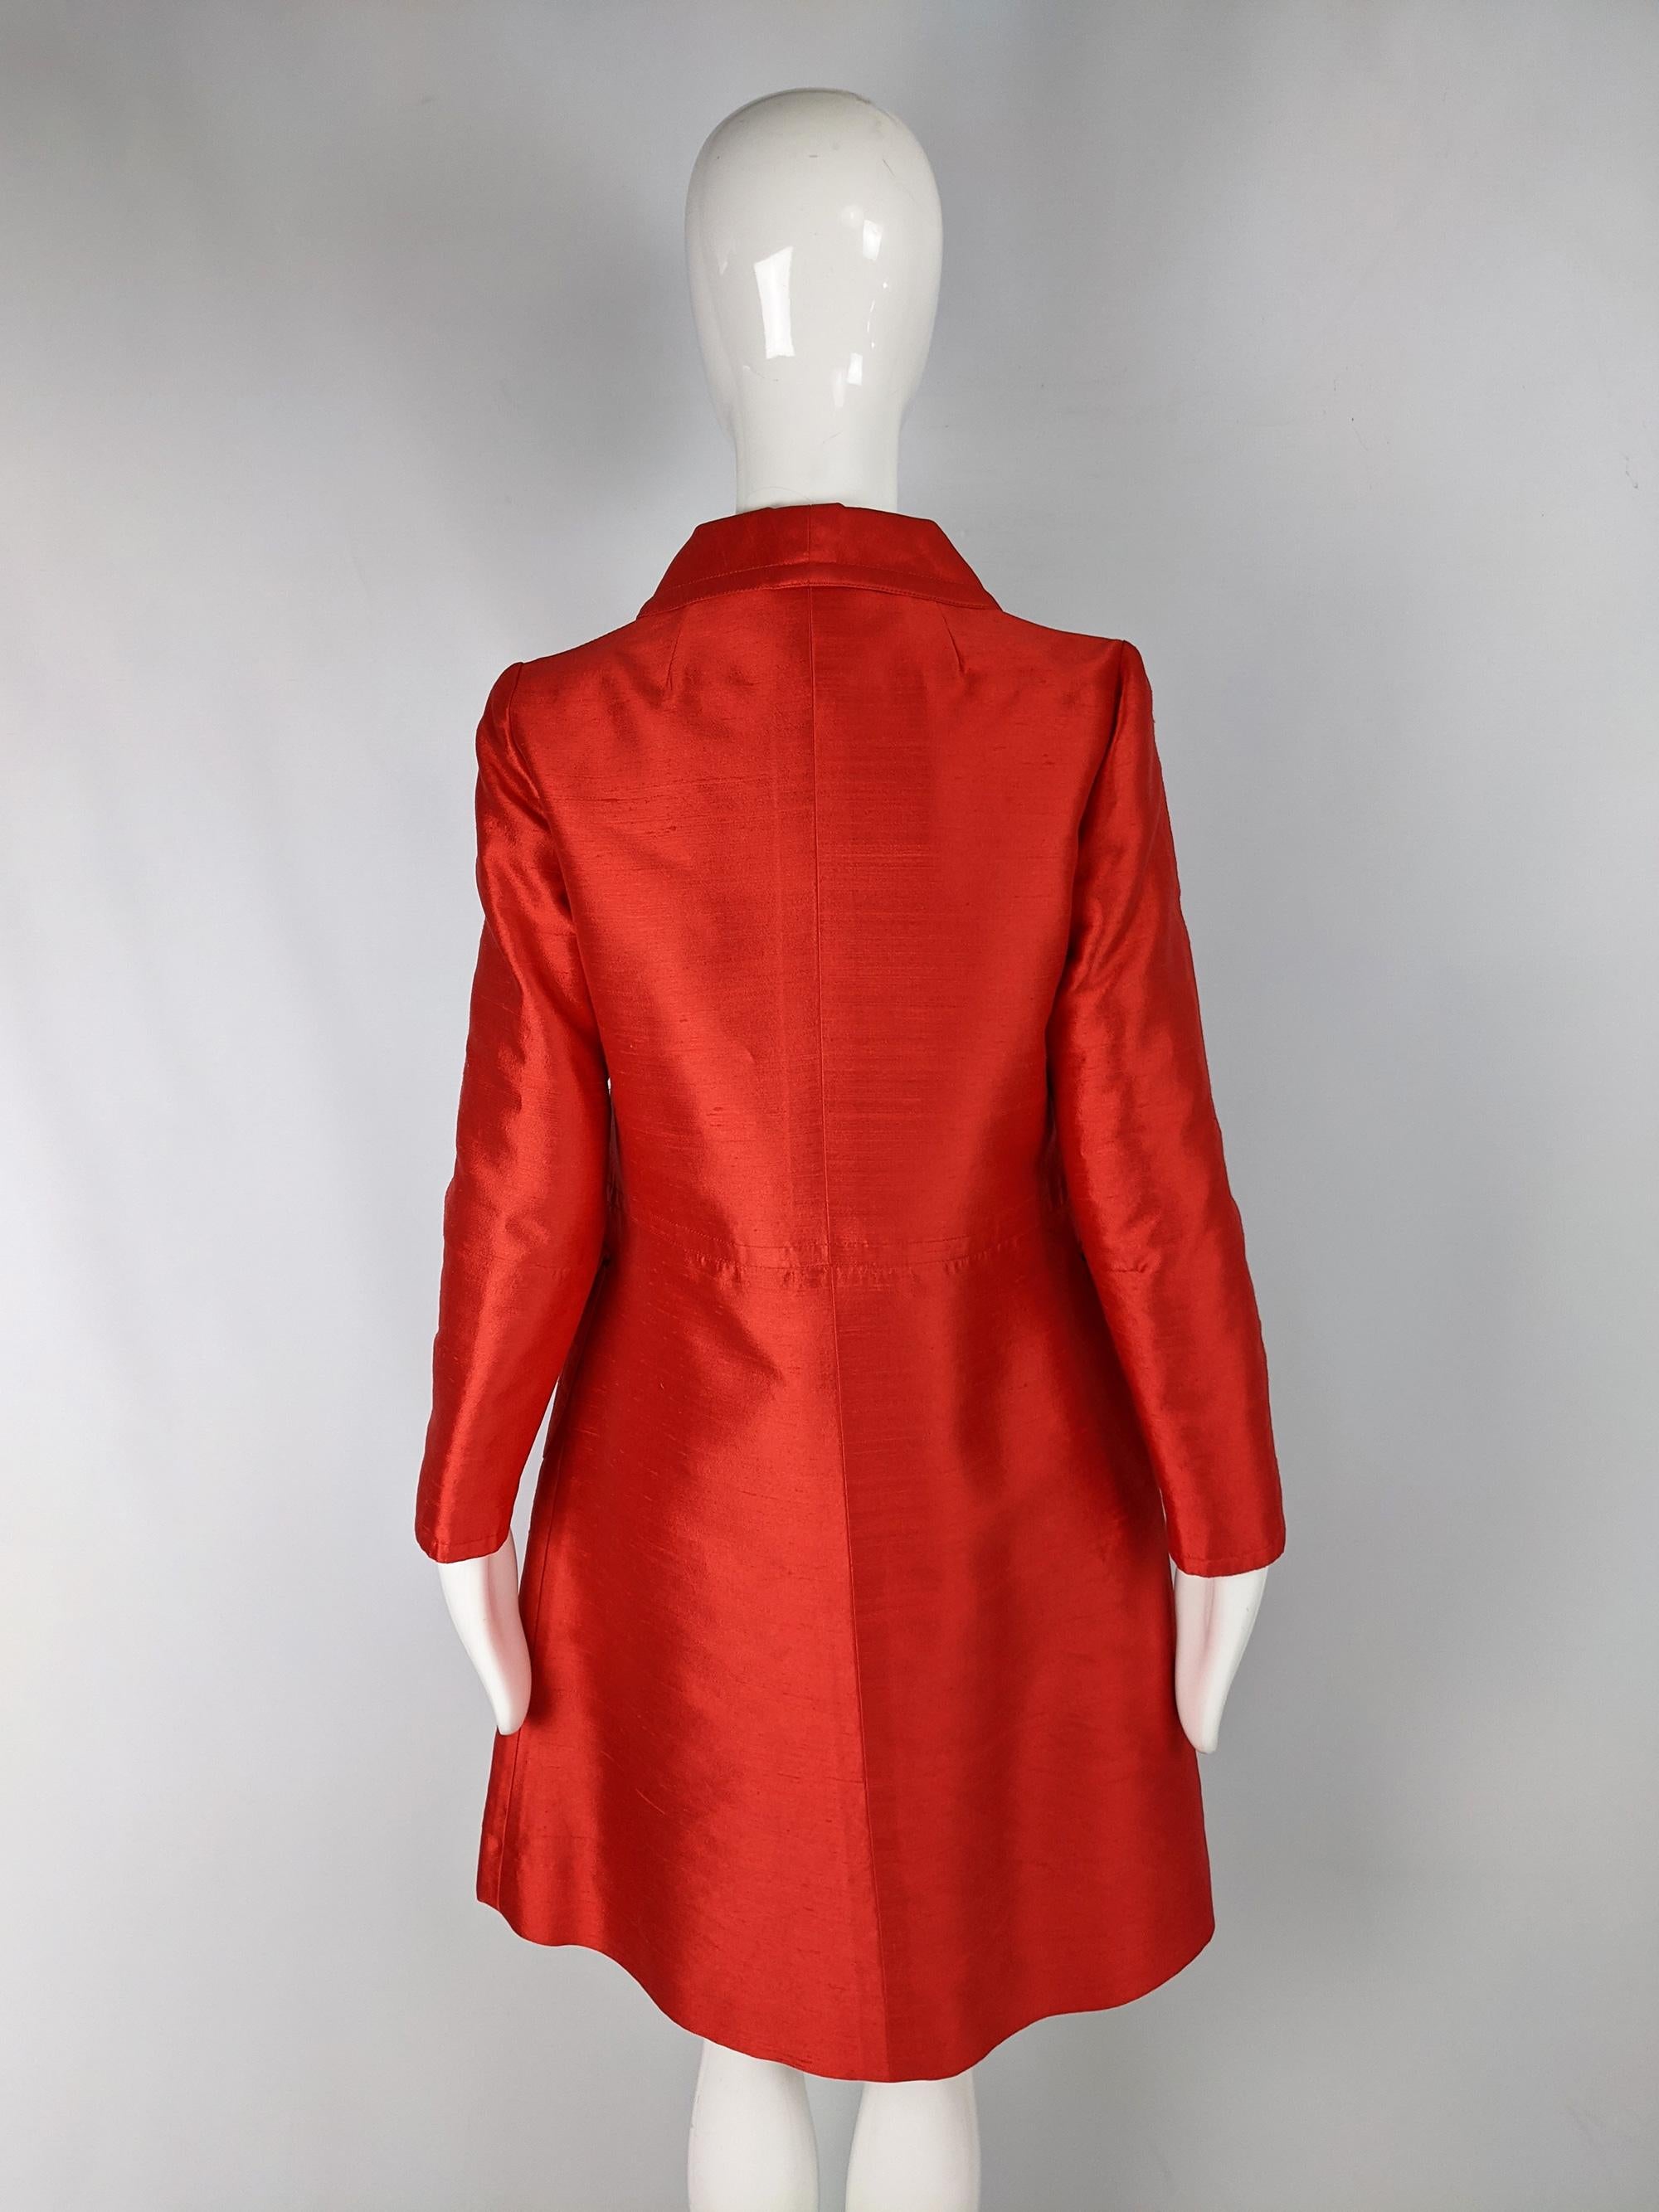 Louis Féraud 1960s Vintage Red Silk & Wool Evening Jacket In Good Condition For Sale In Doncaster, South Yorkshire